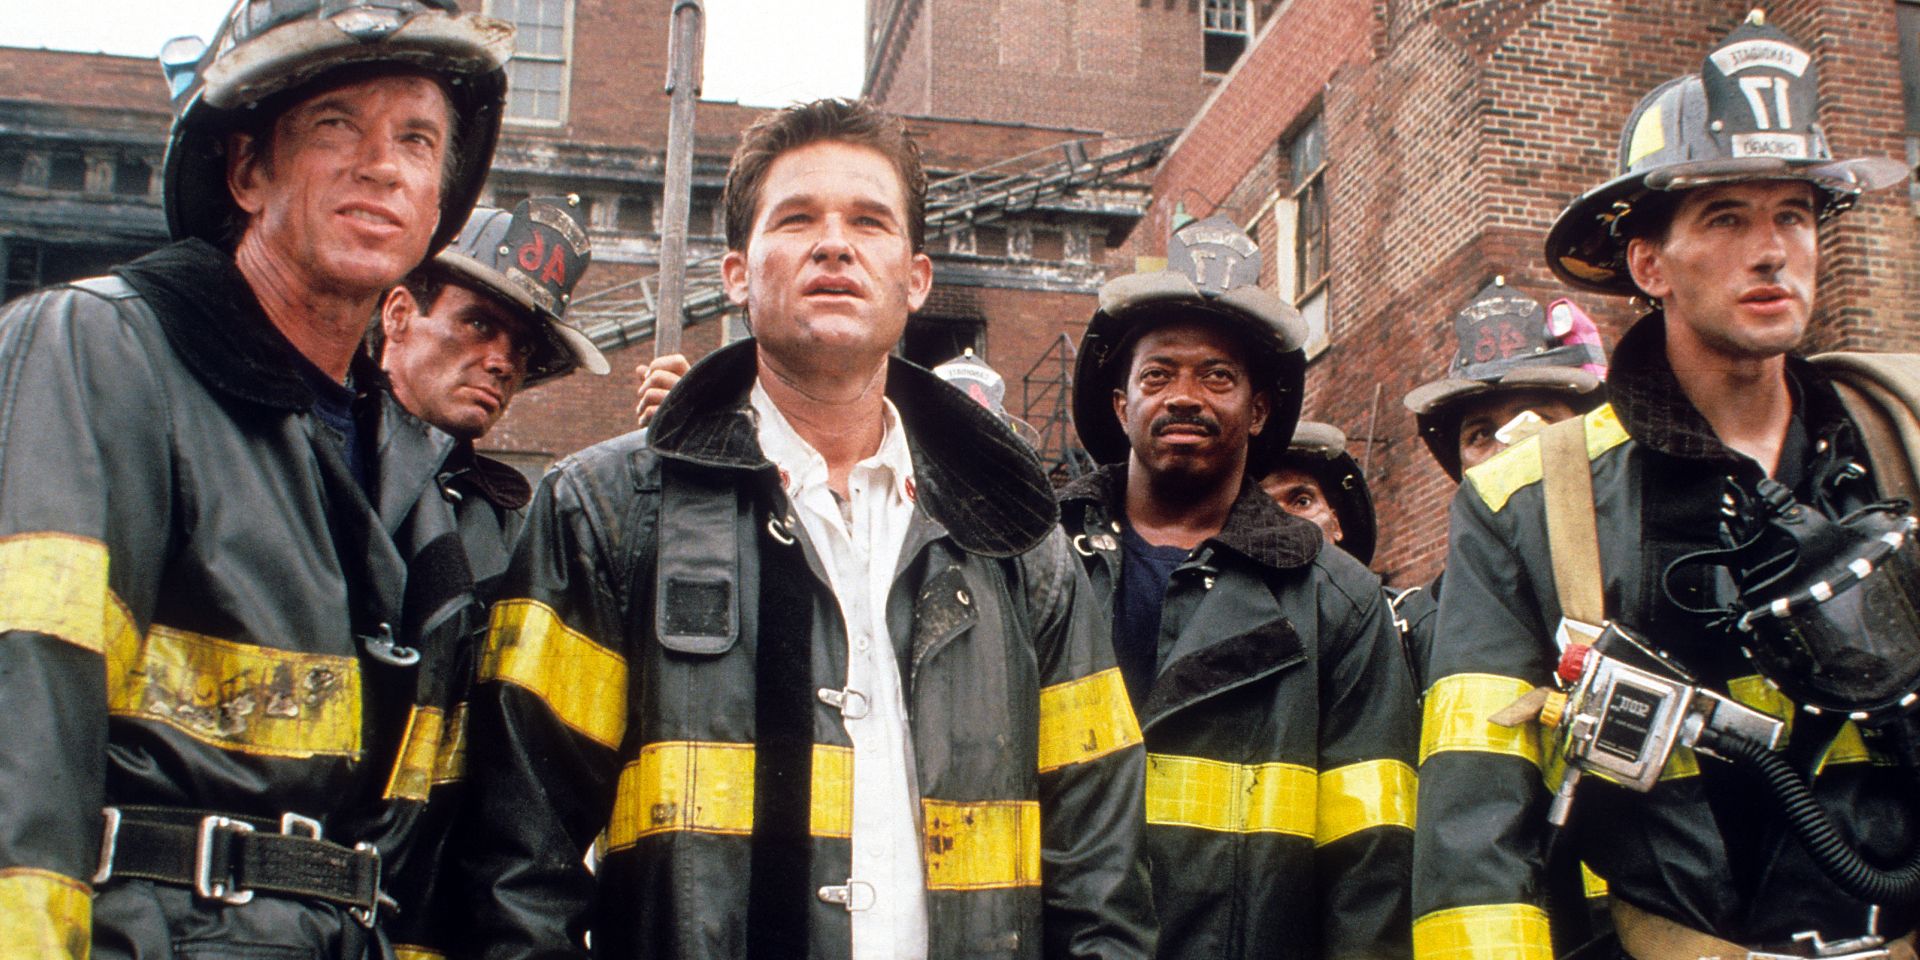 Characters from the movie Backdraft